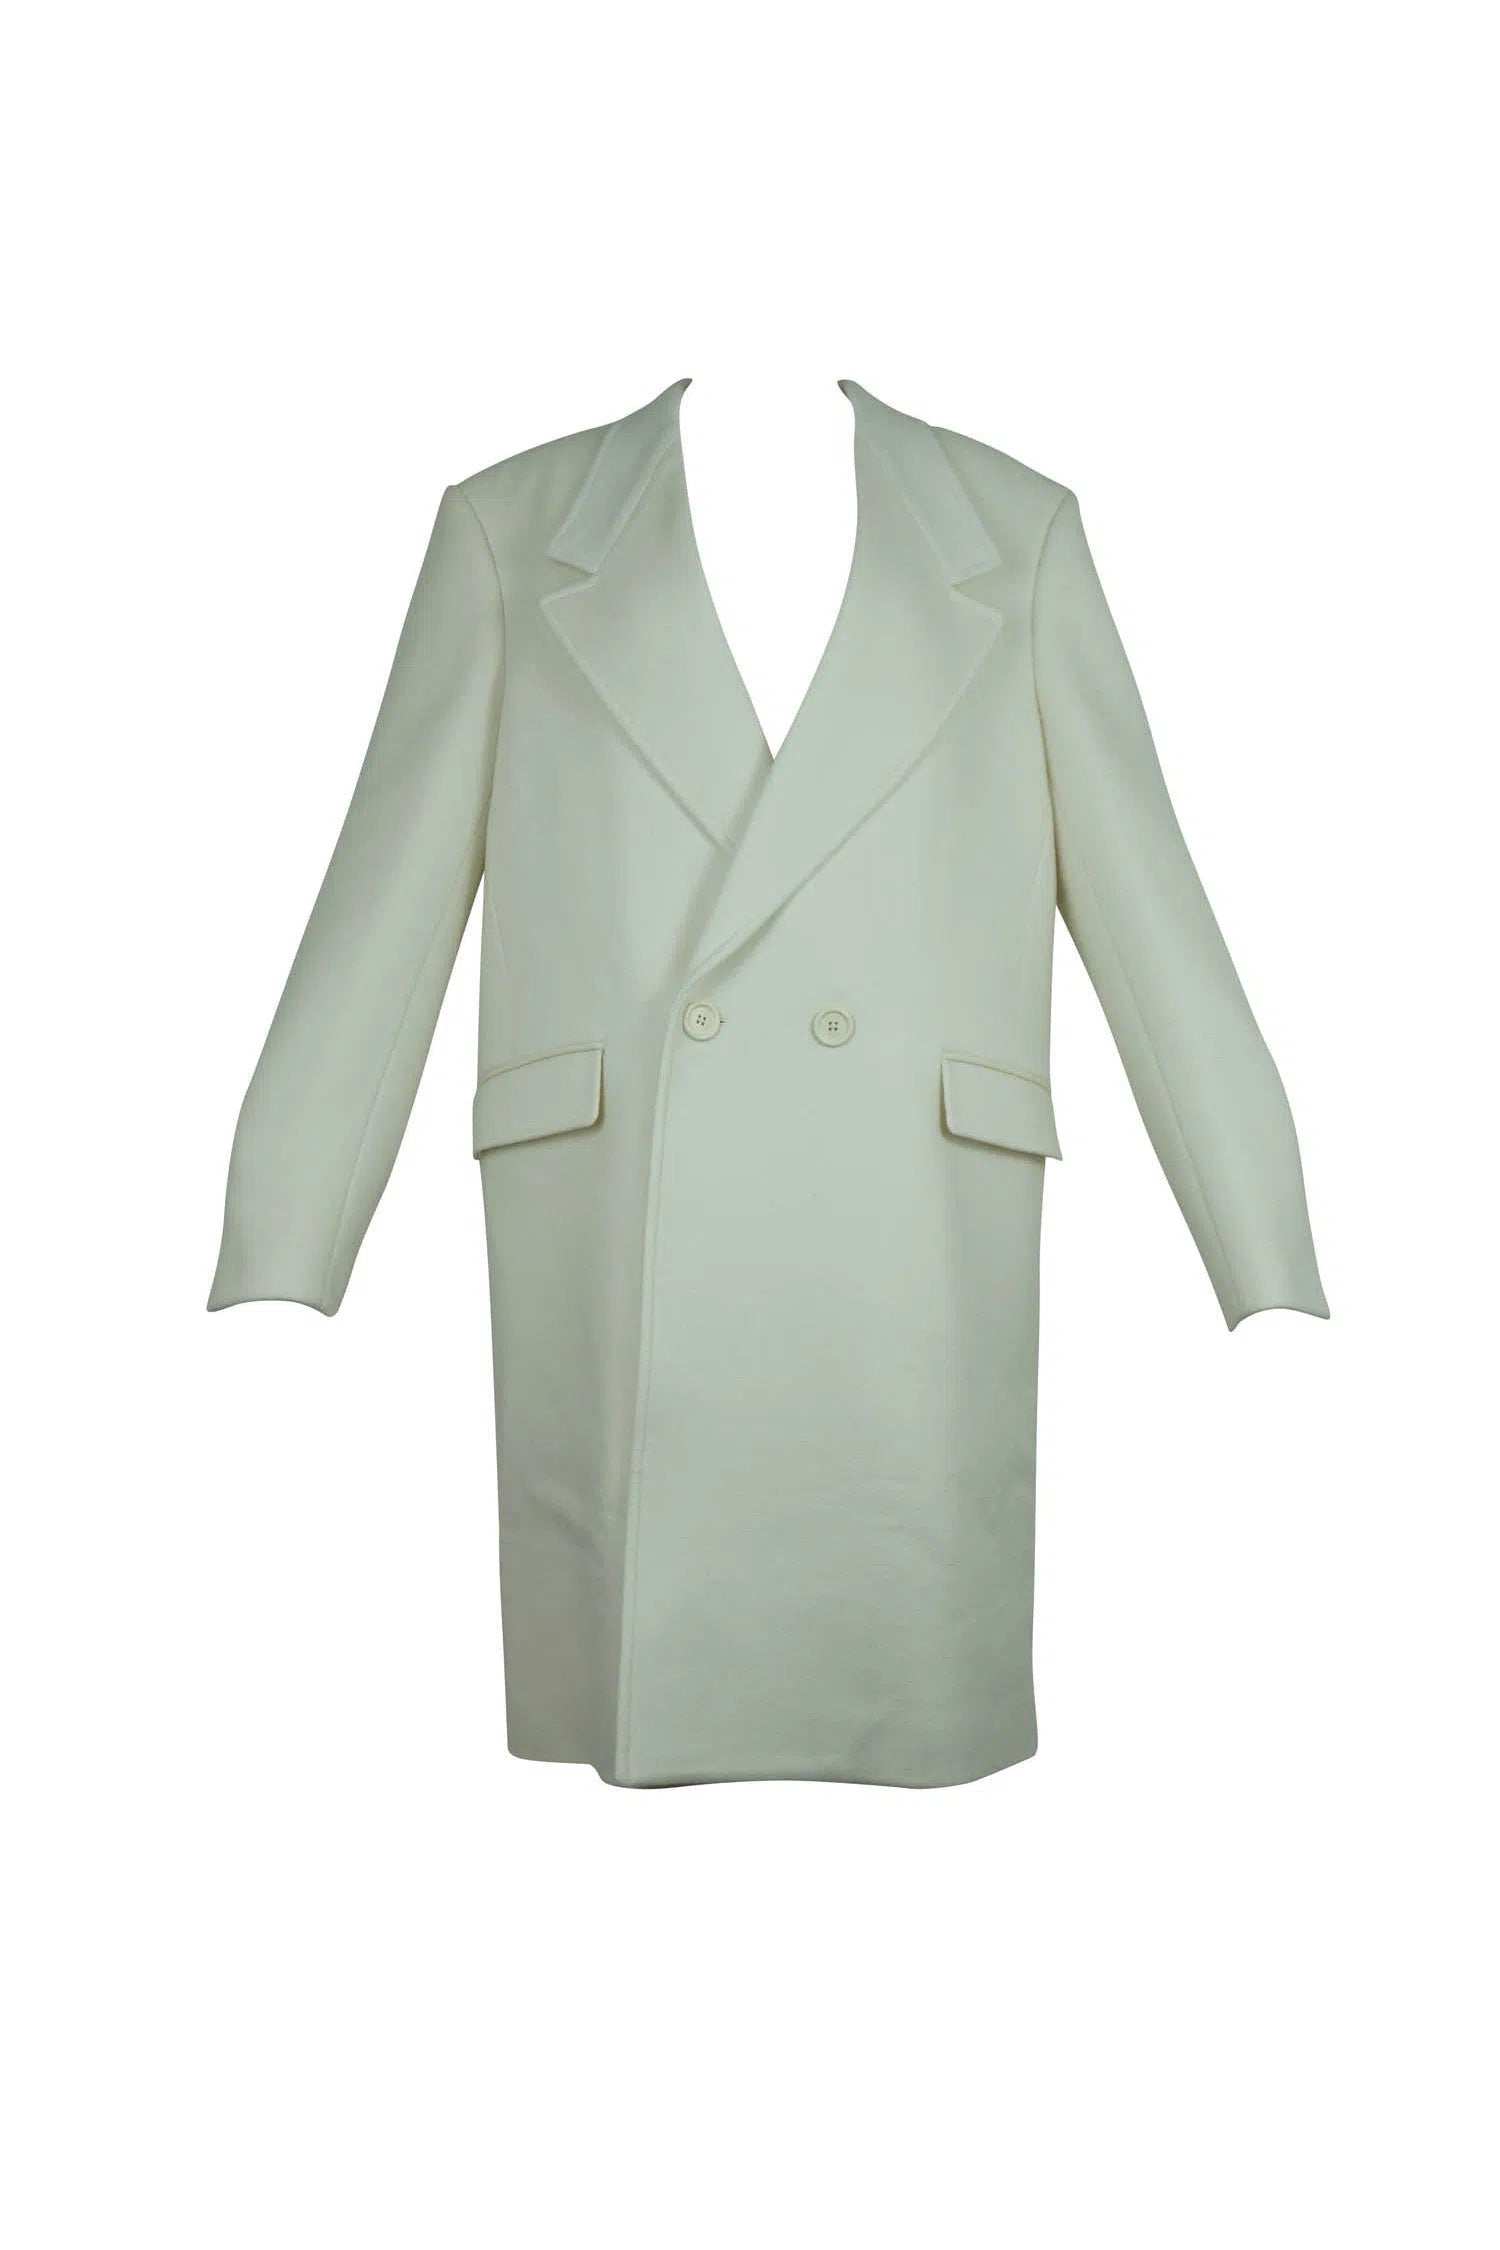 Celine Ivory Cashmere Tailored Over Coat NWT Sz 46 - Foxy Couture Carmel